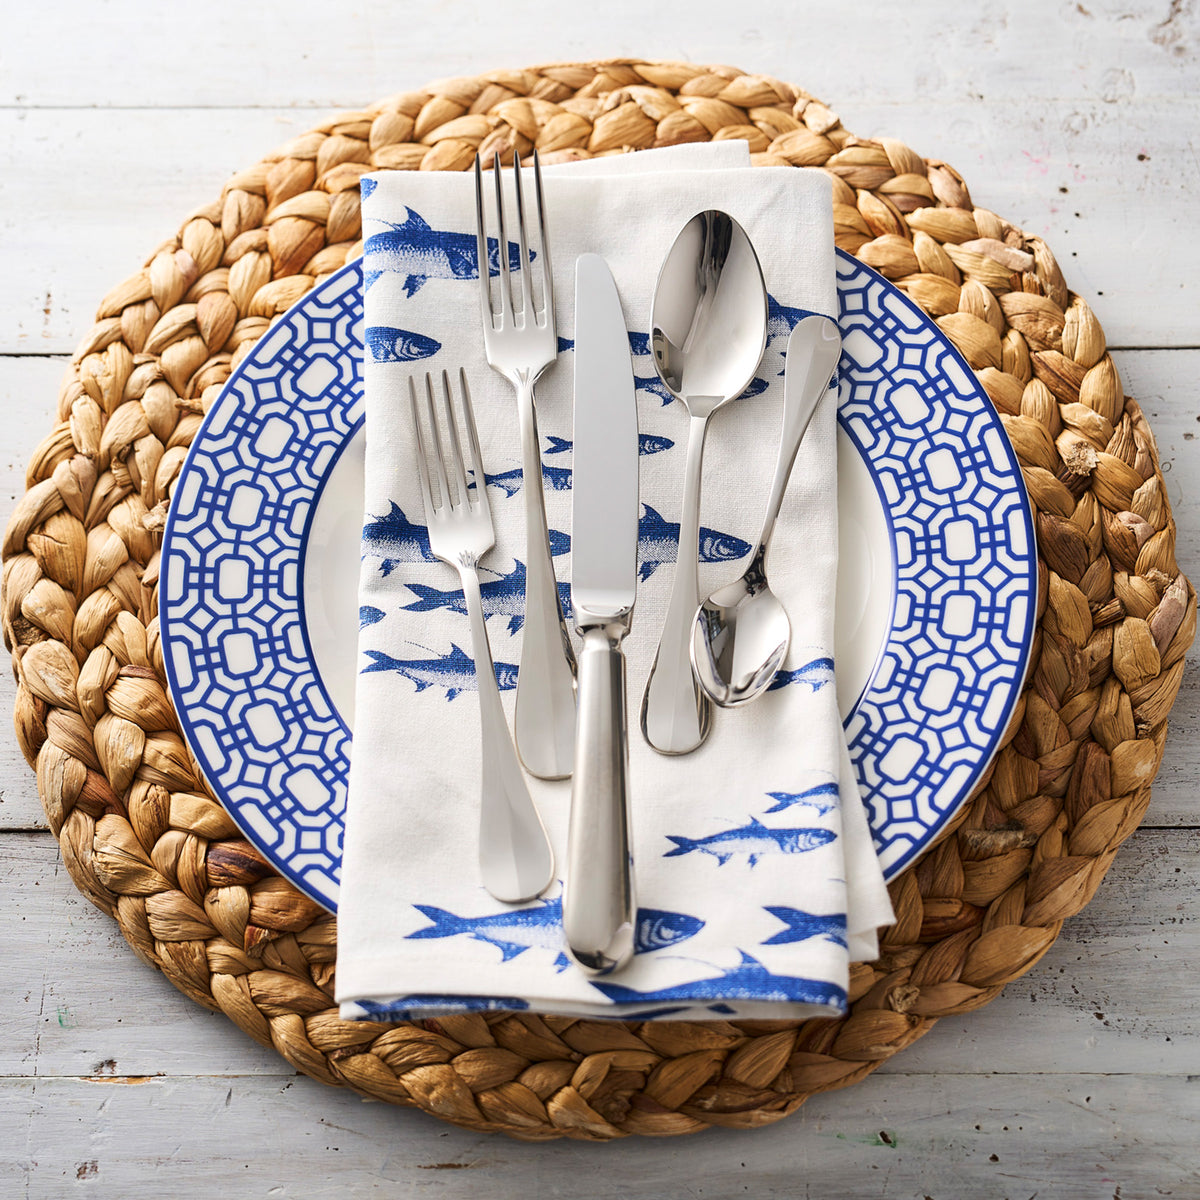 A Newport Garden Gate Blue Rimmed Dinner Plate set with forks and knives, adding a contemporary note to the table by Caskata Artisanal Home.